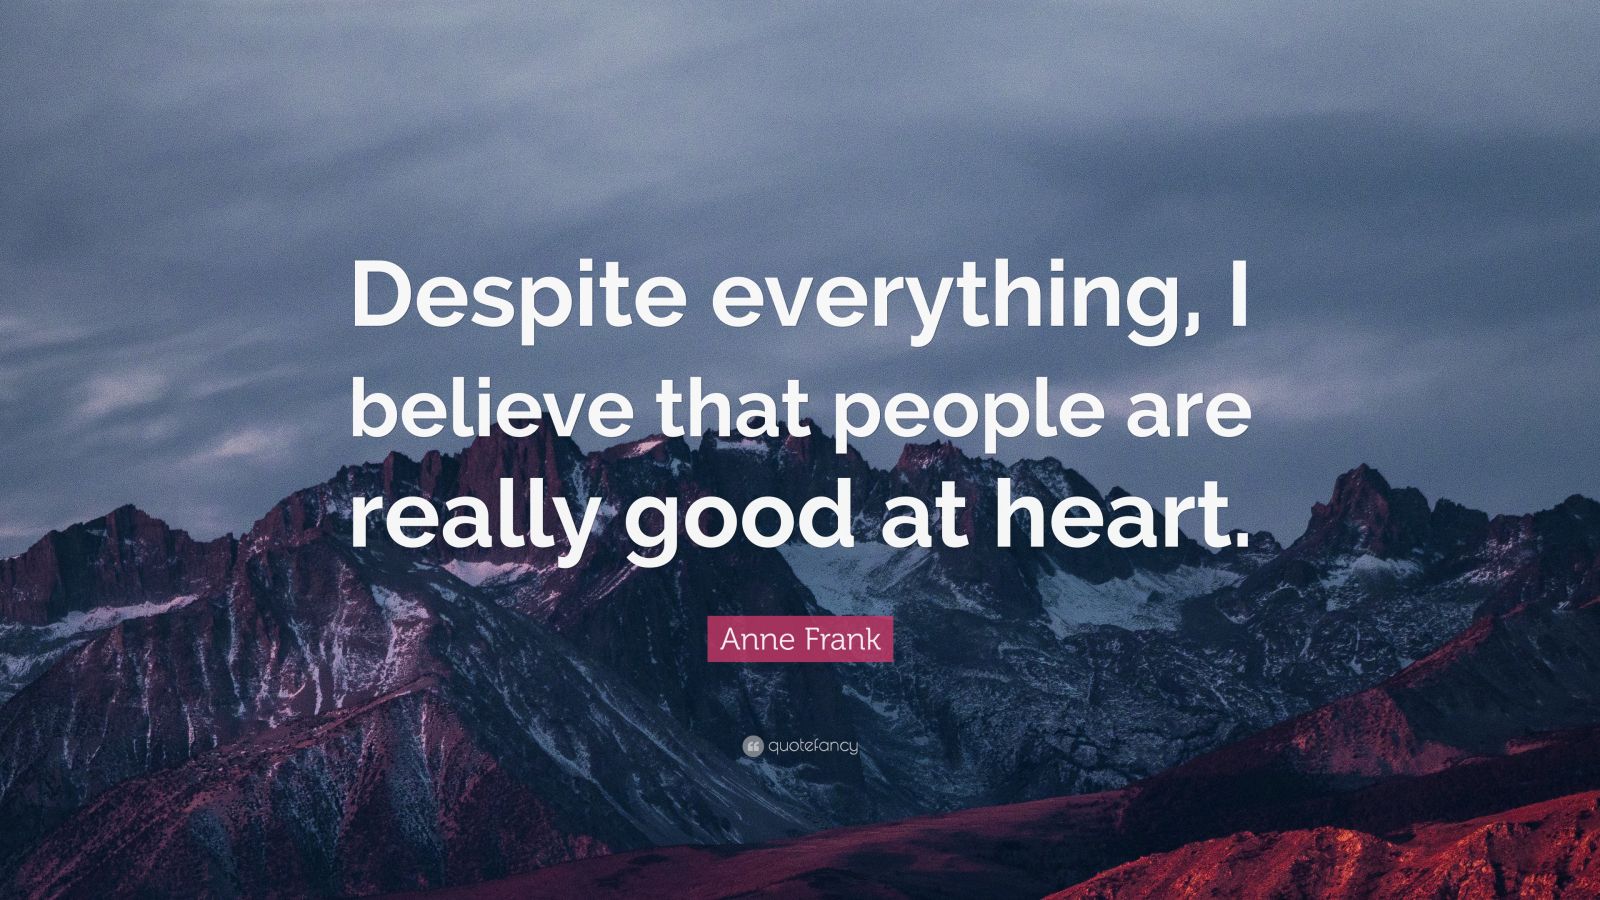 Anne Frank: Why People Are Good At Heart